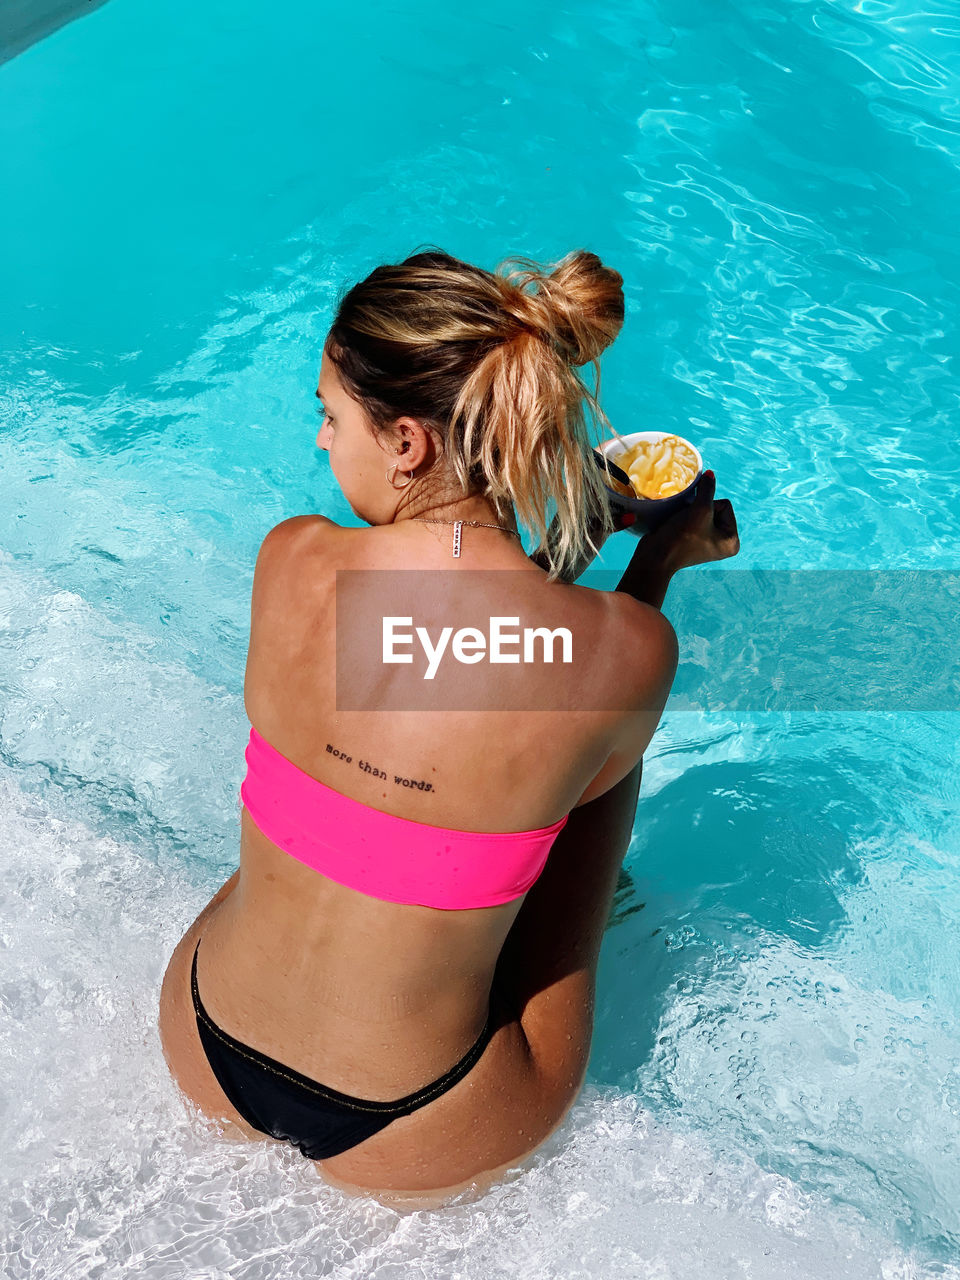 water, women, clothing, one person, adult, rear view, swimming pool, swimwear, swimming, bikini, leisure activity, lifestyles, young adult, nature, vacation, summer, high angle view, trip, holiday, female, hairstyle, relaxation, day, sports, wellbeing, outdoors, long hair, sunlight, three quarter length, wet, back, sea